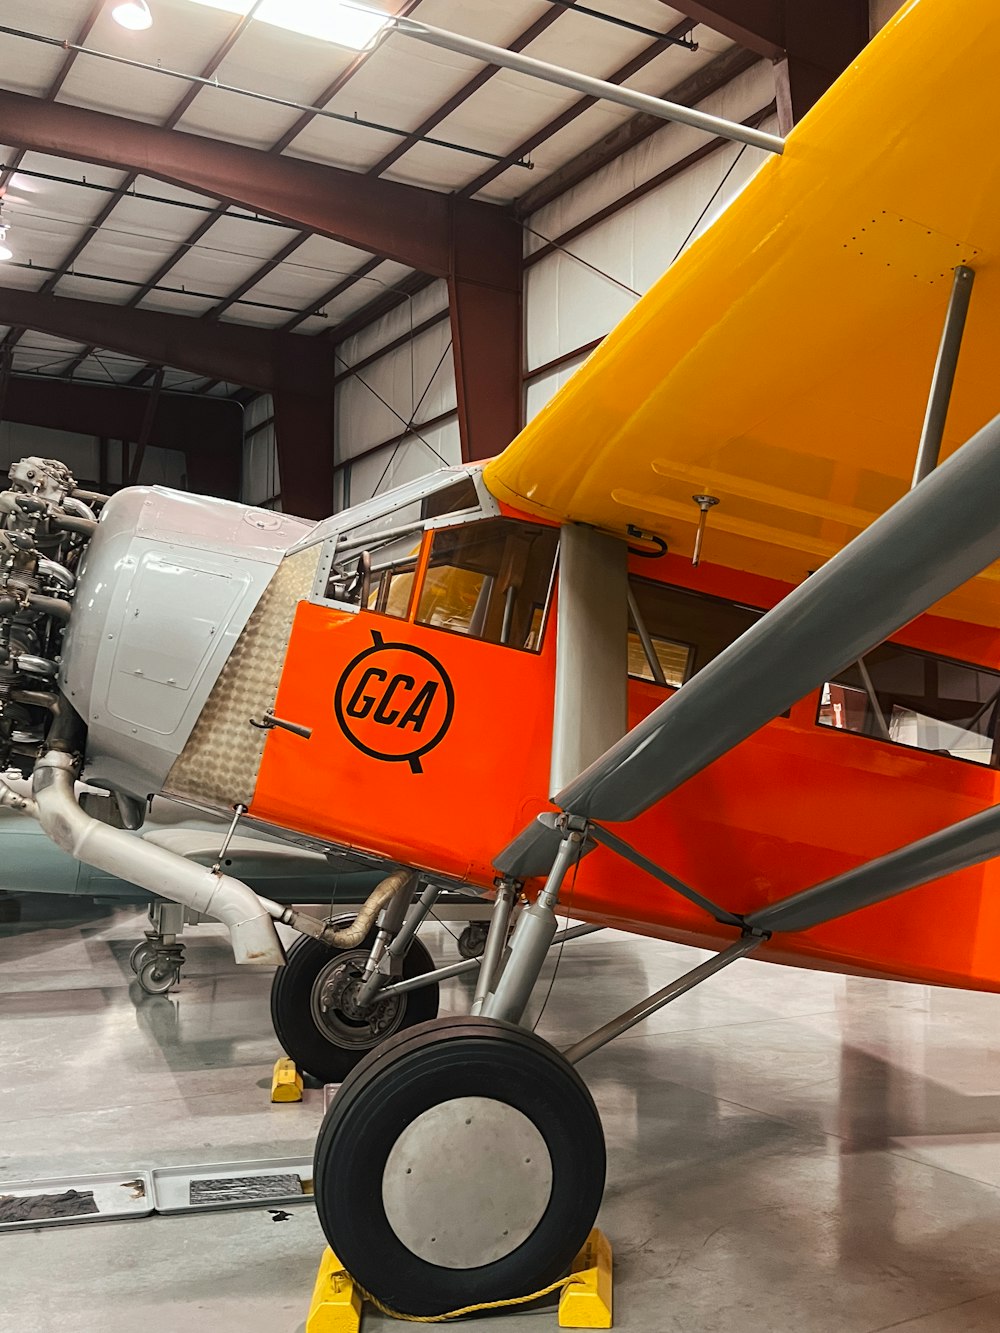 an orange and white airplane in a hanger